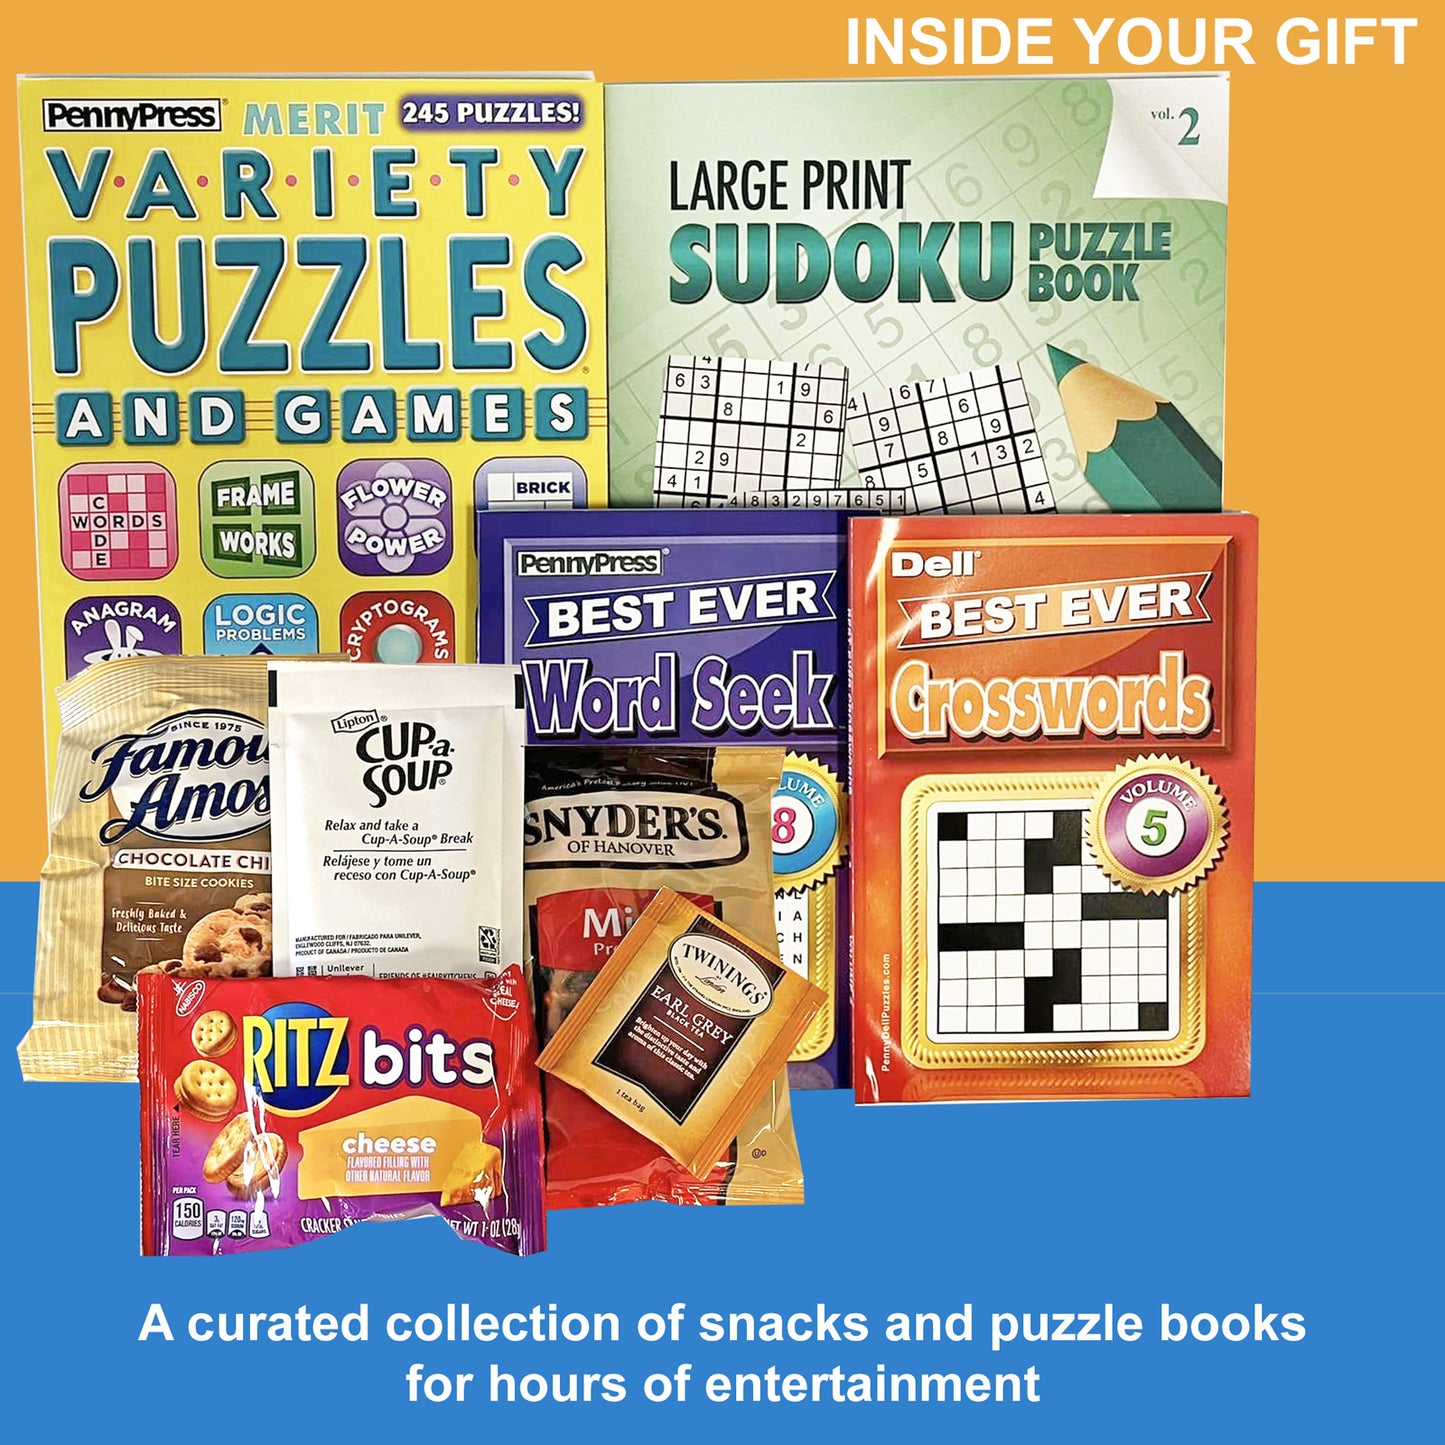 Comforting Get Well Gift Box with Puzzle Books and Snacks